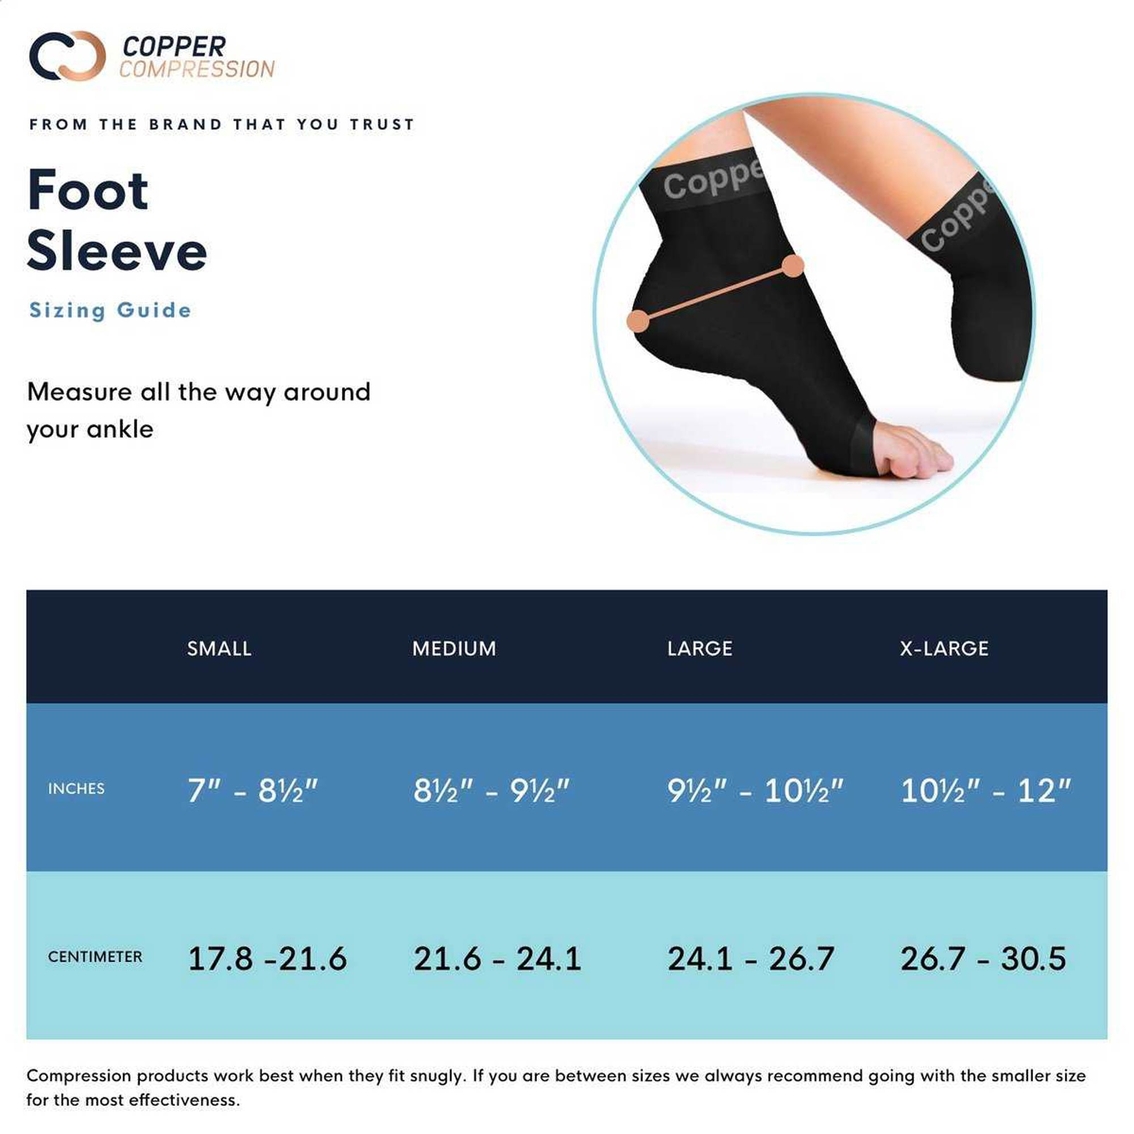 Copper Compression Foot Sleeve - Image 2 of 3